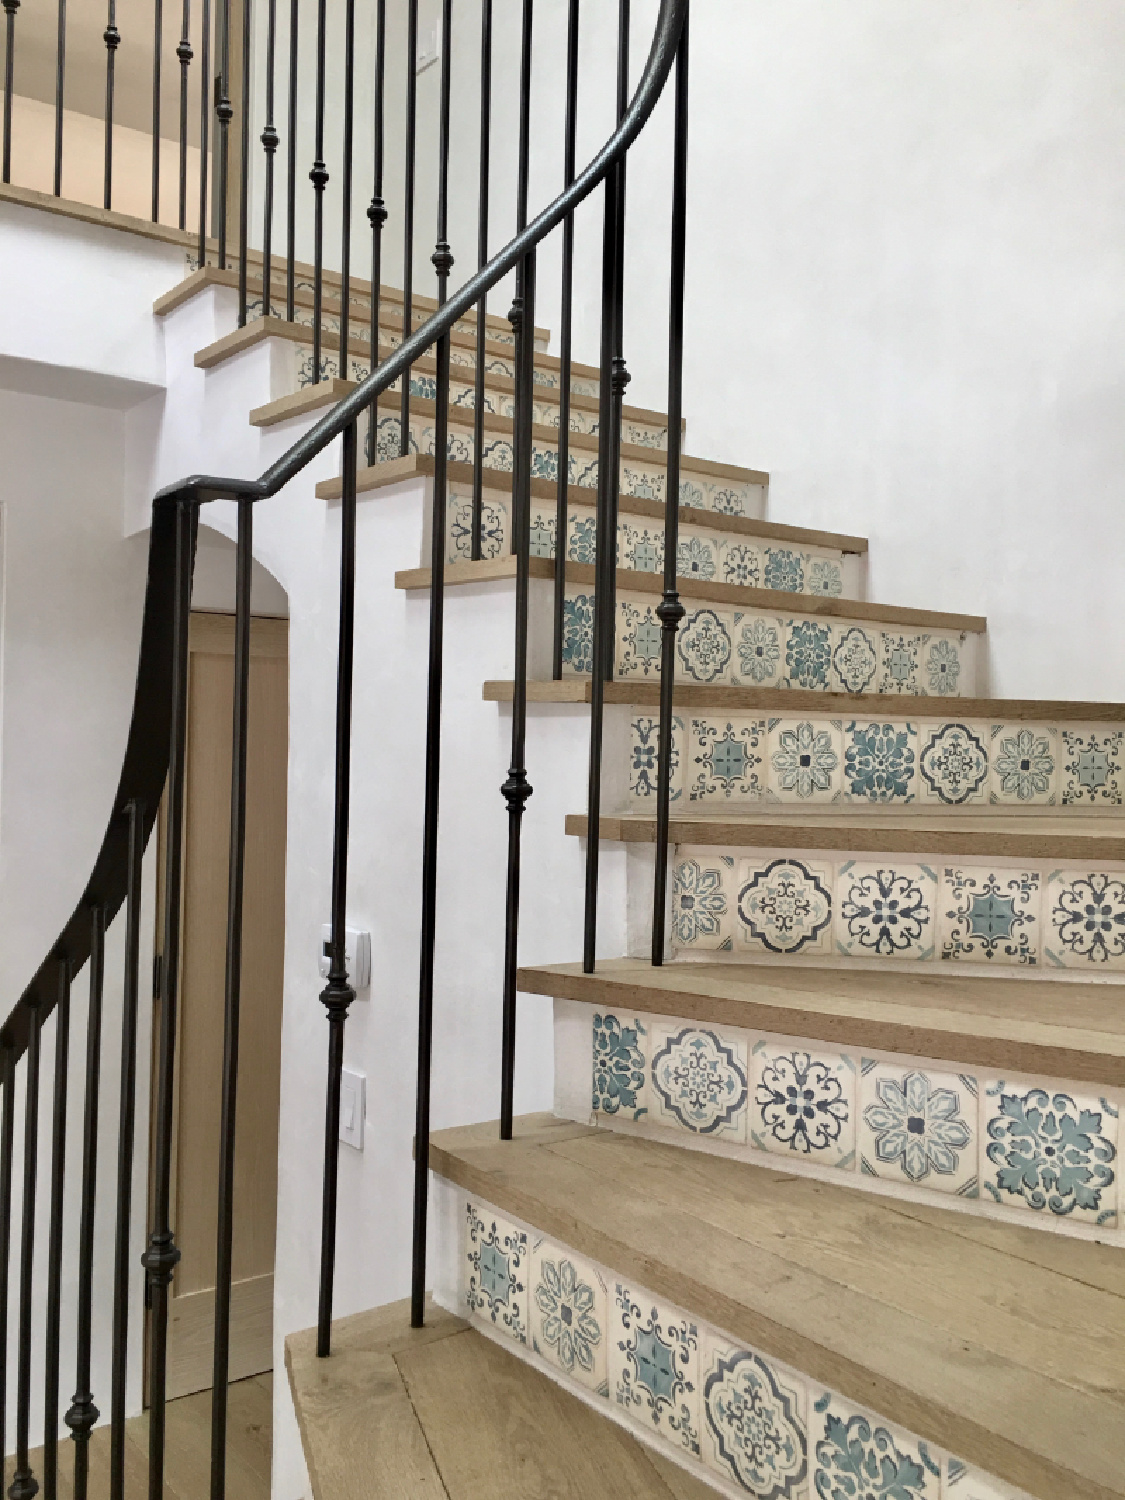 Tiled staircase - Steve Giannetti designed modern Mediterranean Malibu home with white oak, natural finishes, limestone, and Old World style. #giannettihome #patinastyle #patinahomes